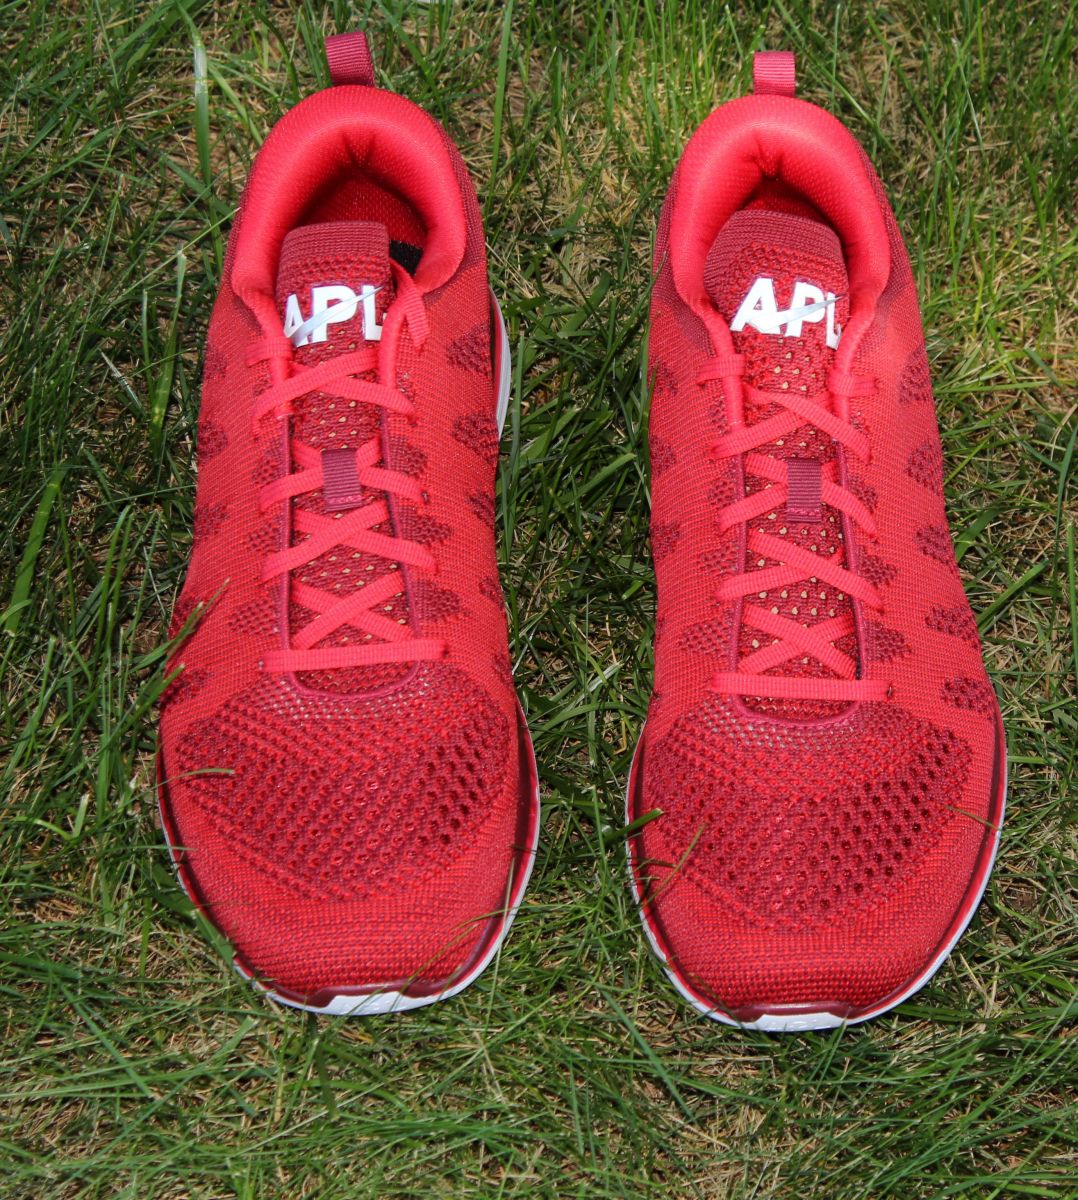 apl shoes red